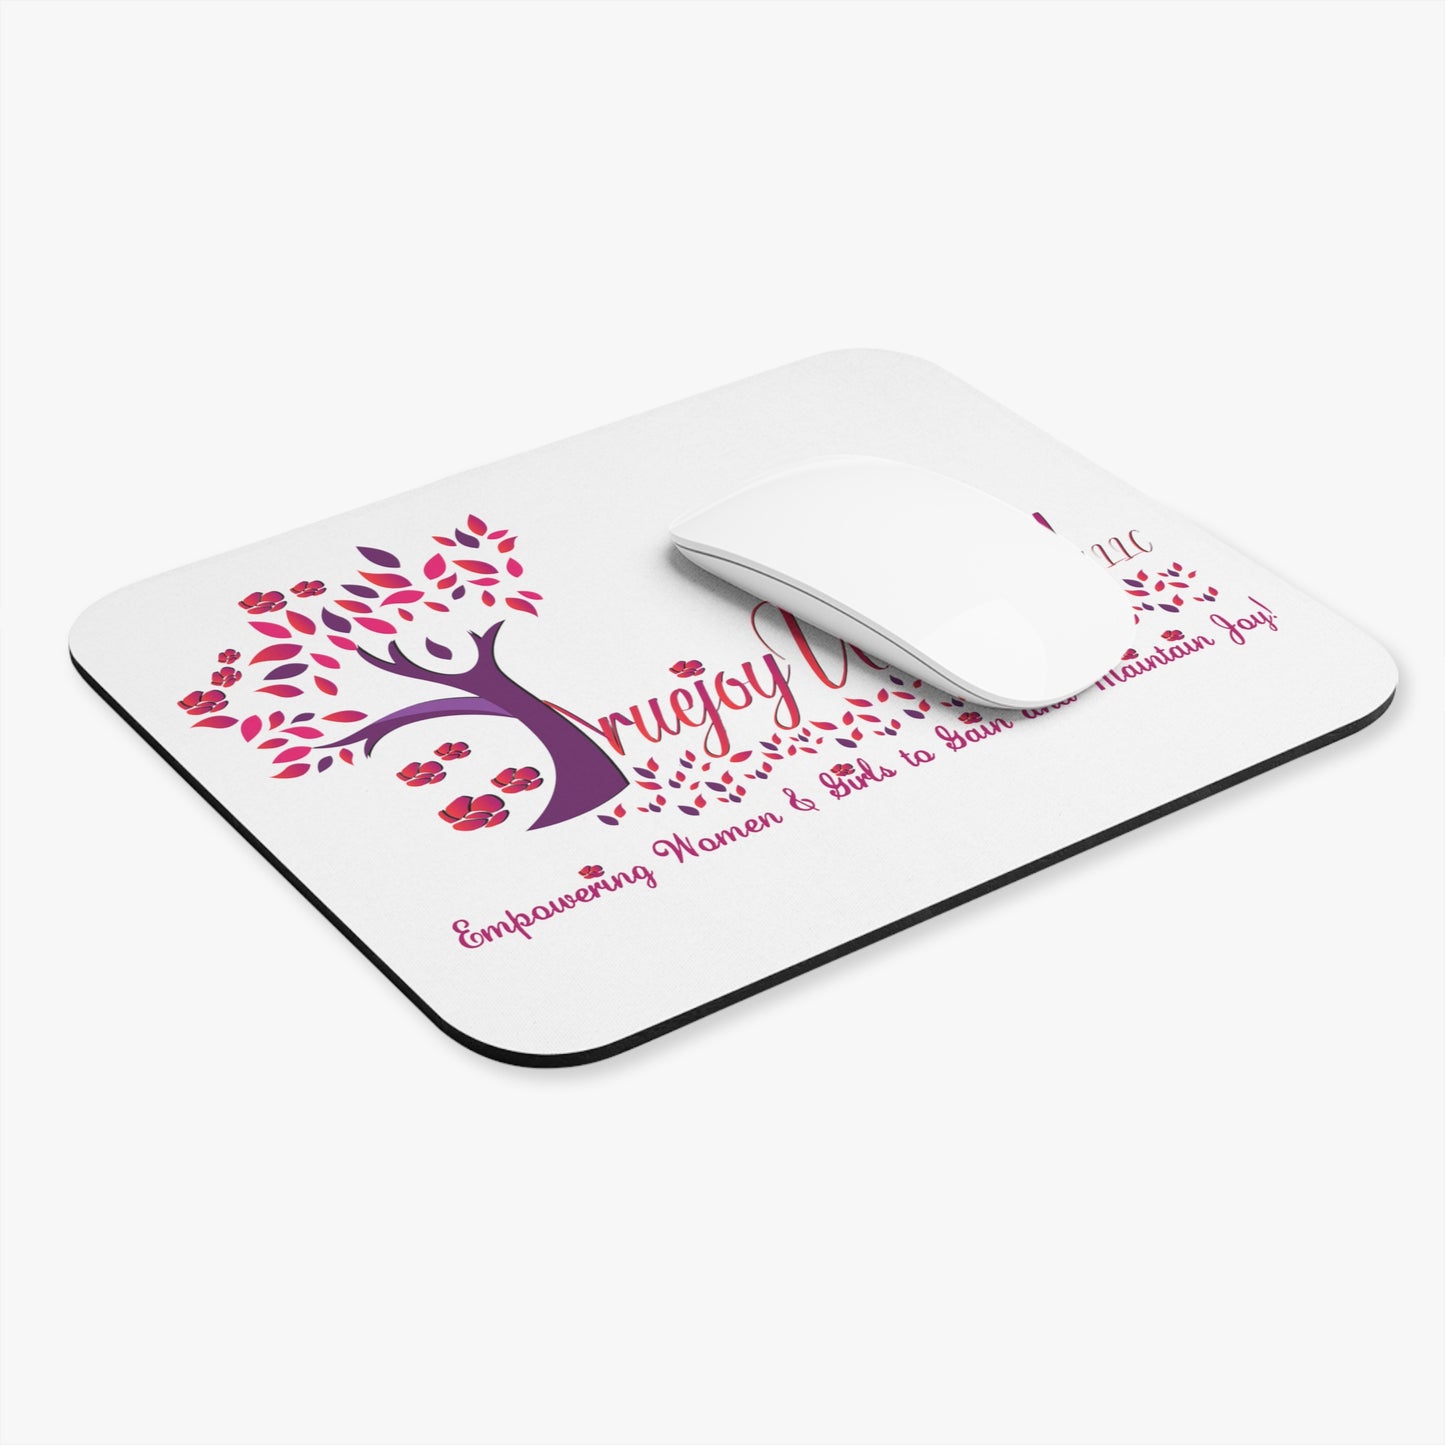 Truejoy Unlimited Mouse Pad, Christian Mouse Pad, Faith Mouse Pad